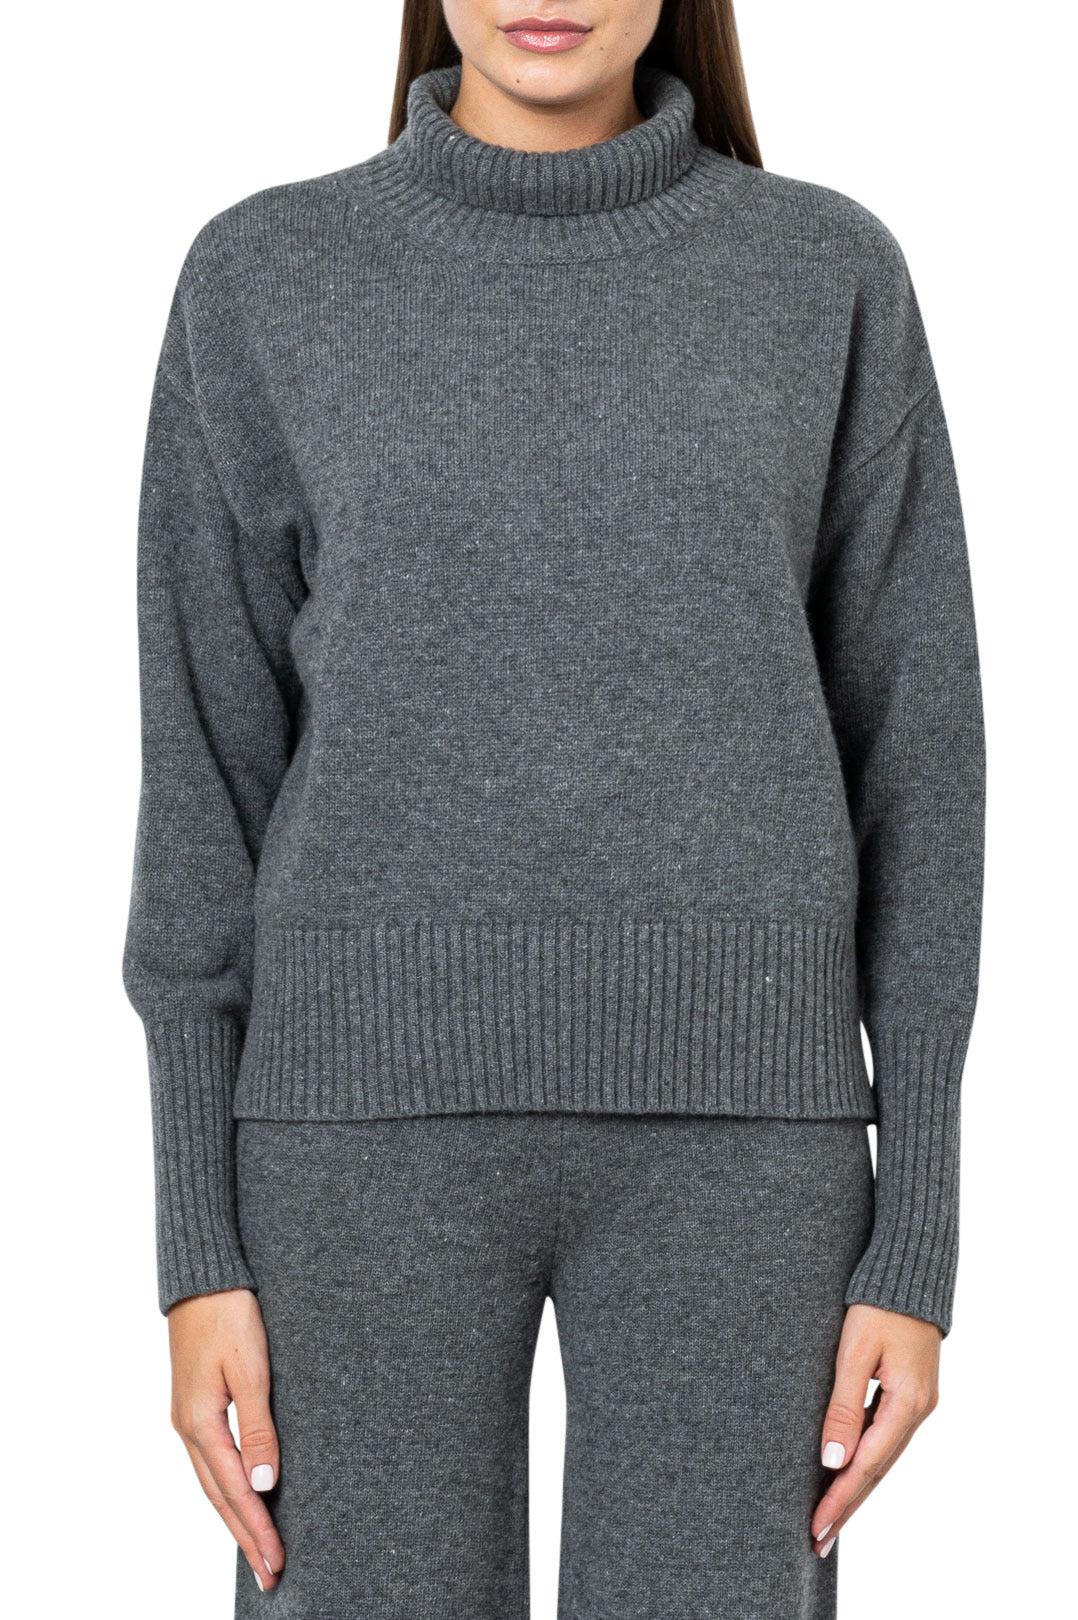 Drae-Wool and cashmere sweater-BD-KN-21PF-01-dgallerystore